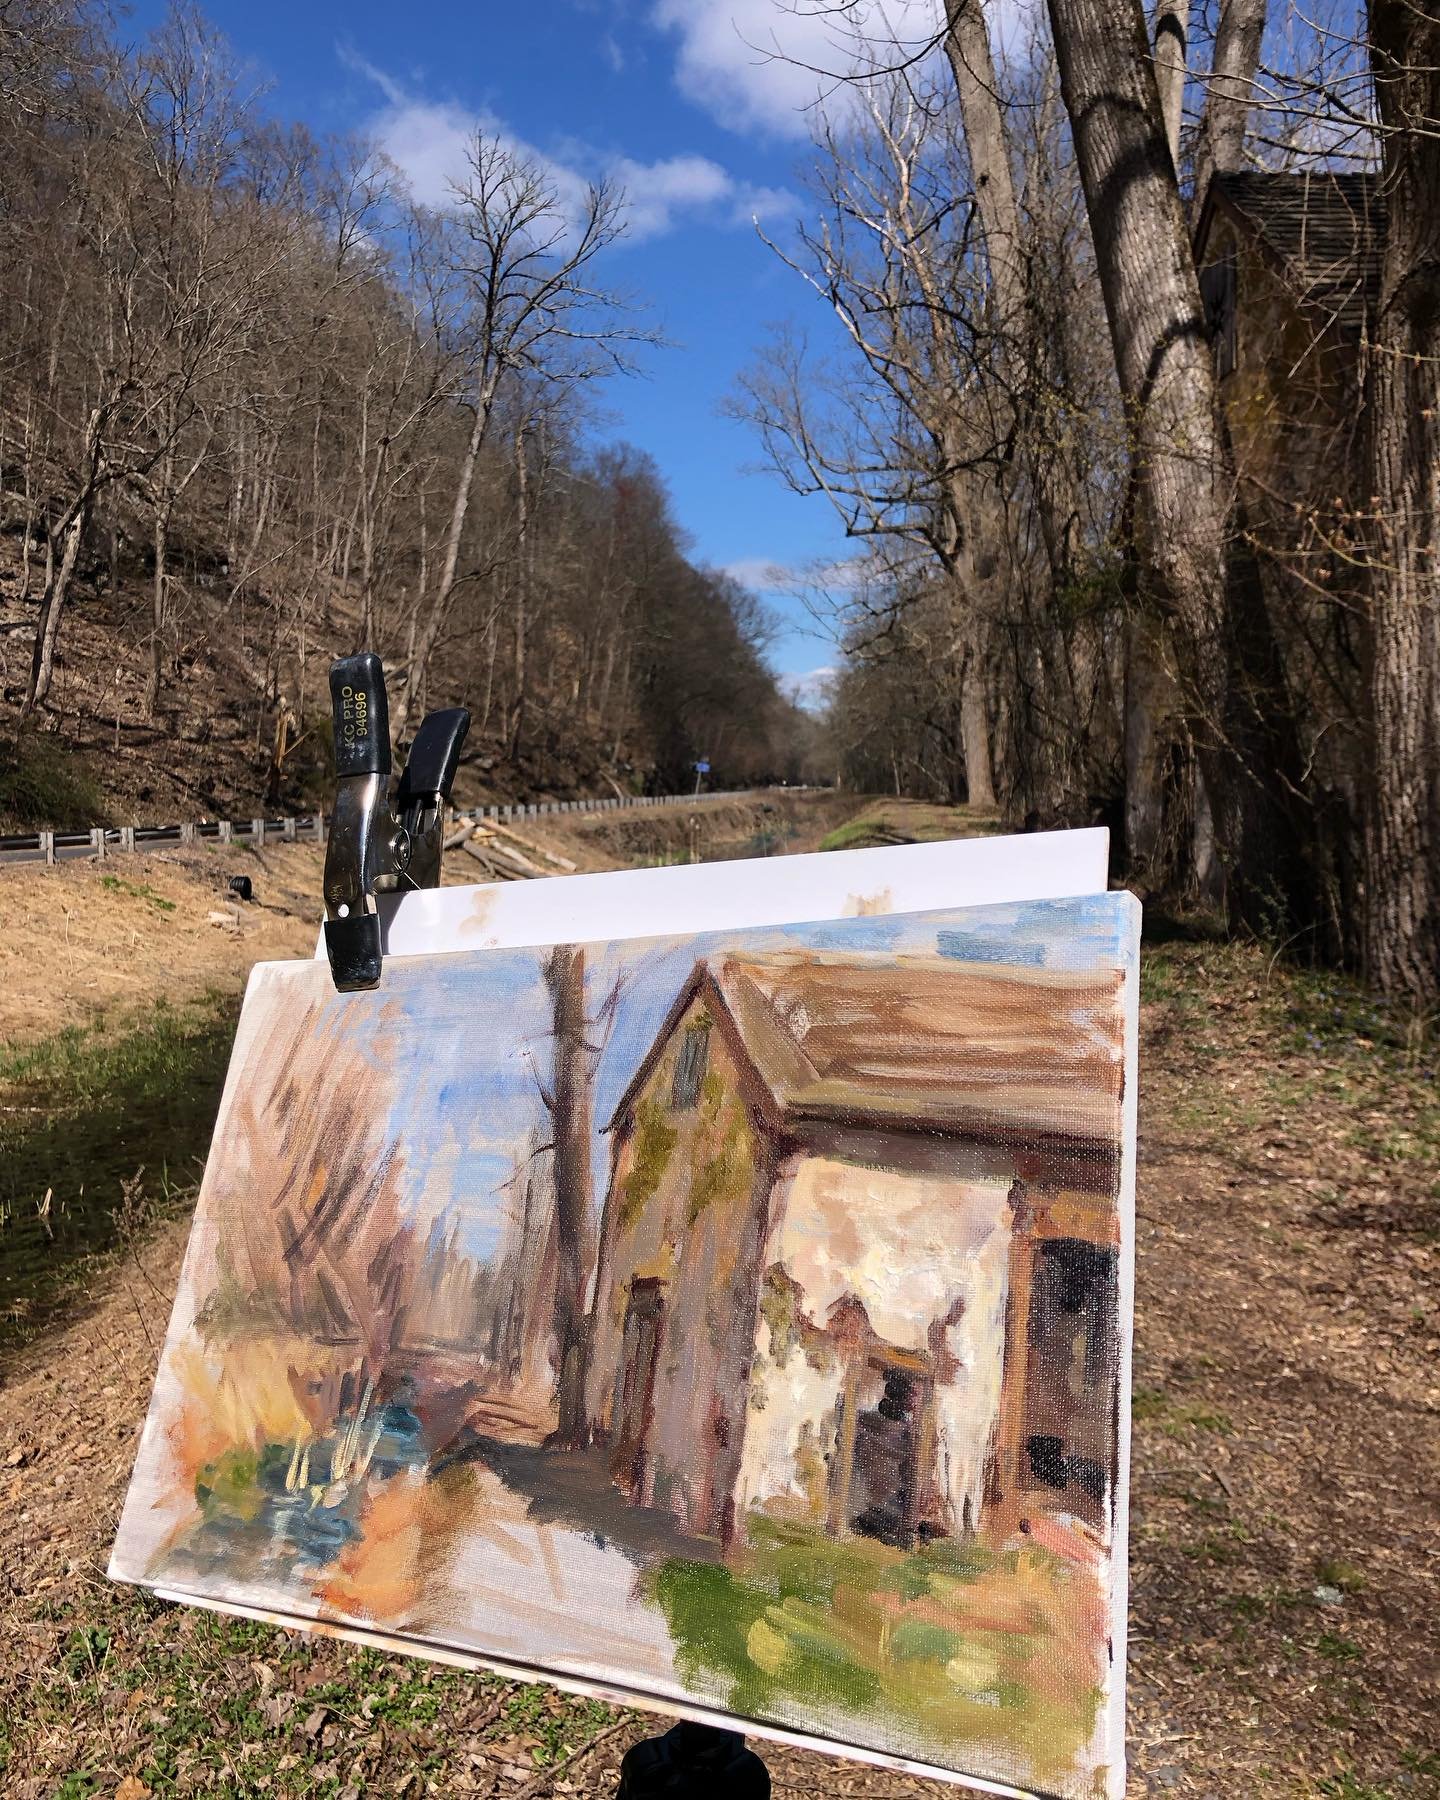 Plein-air painting WIP of this incredible historic barn, a patchwork of old crumbling plaster and new chartreuse growth on River road in Upper Bucks.

The finished piece will be exhibited at Hunterdon Land Trust&rsquo;s &lsquo;Wine and Art at the Far